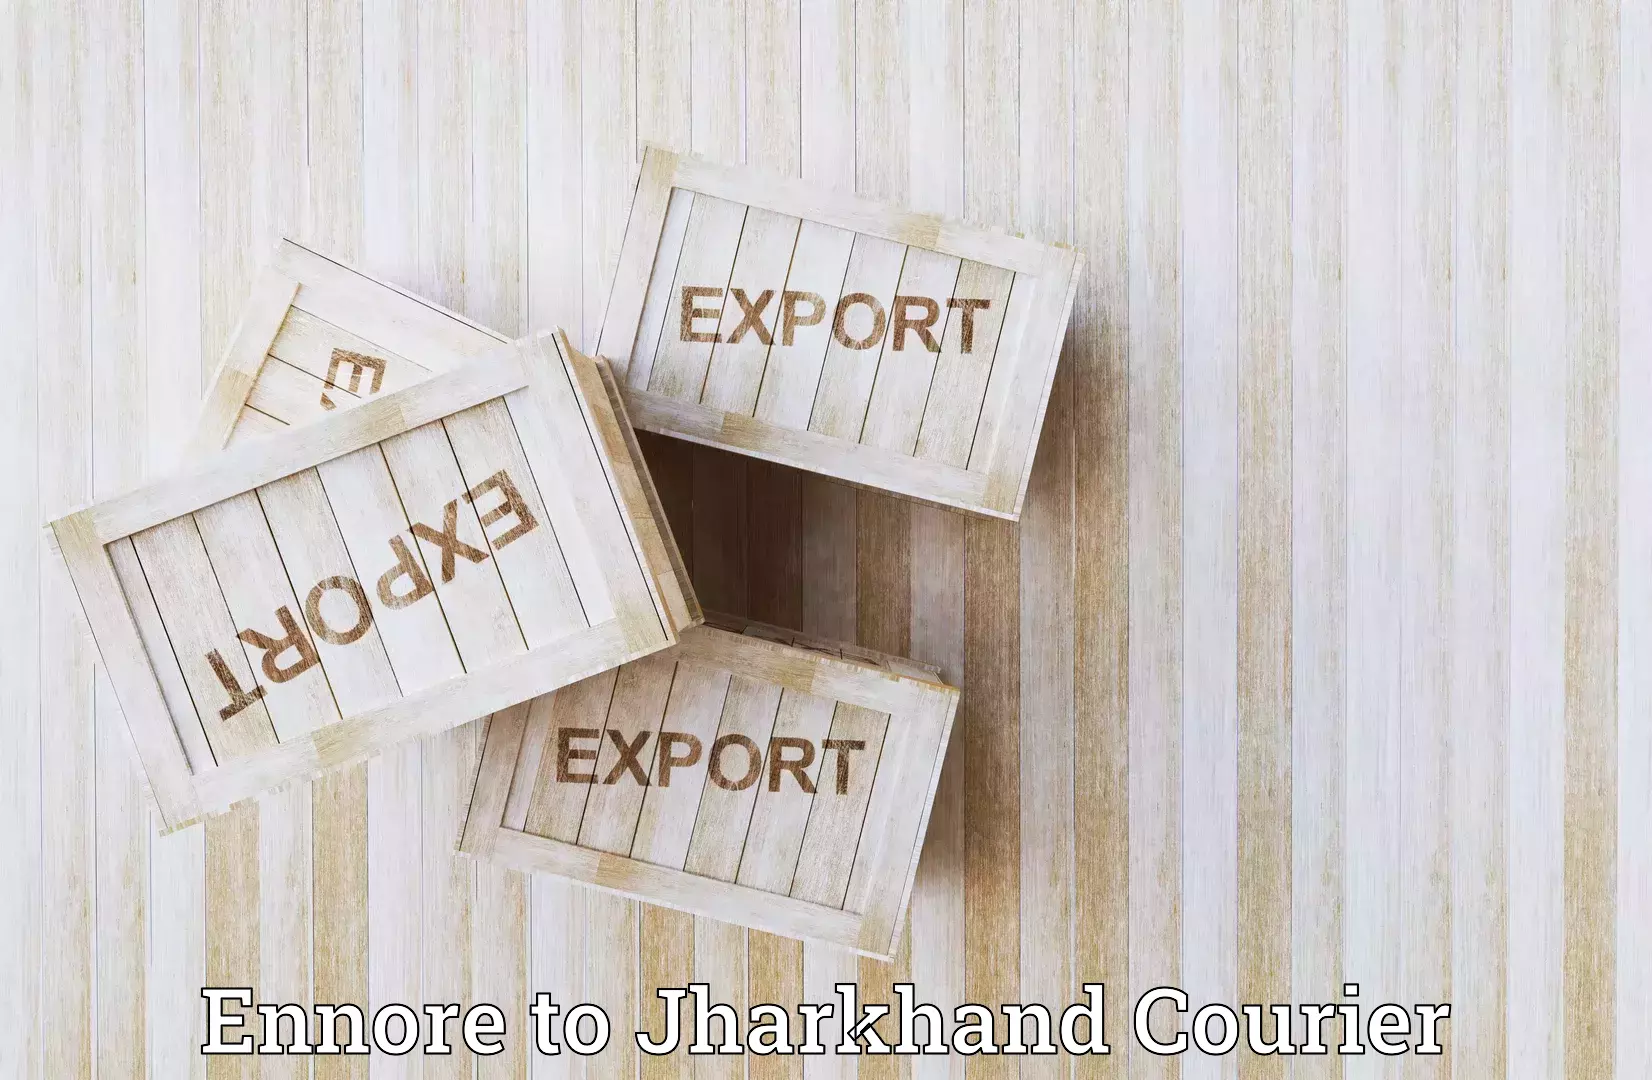 Parcel handling and care Ennore to Jharkhand